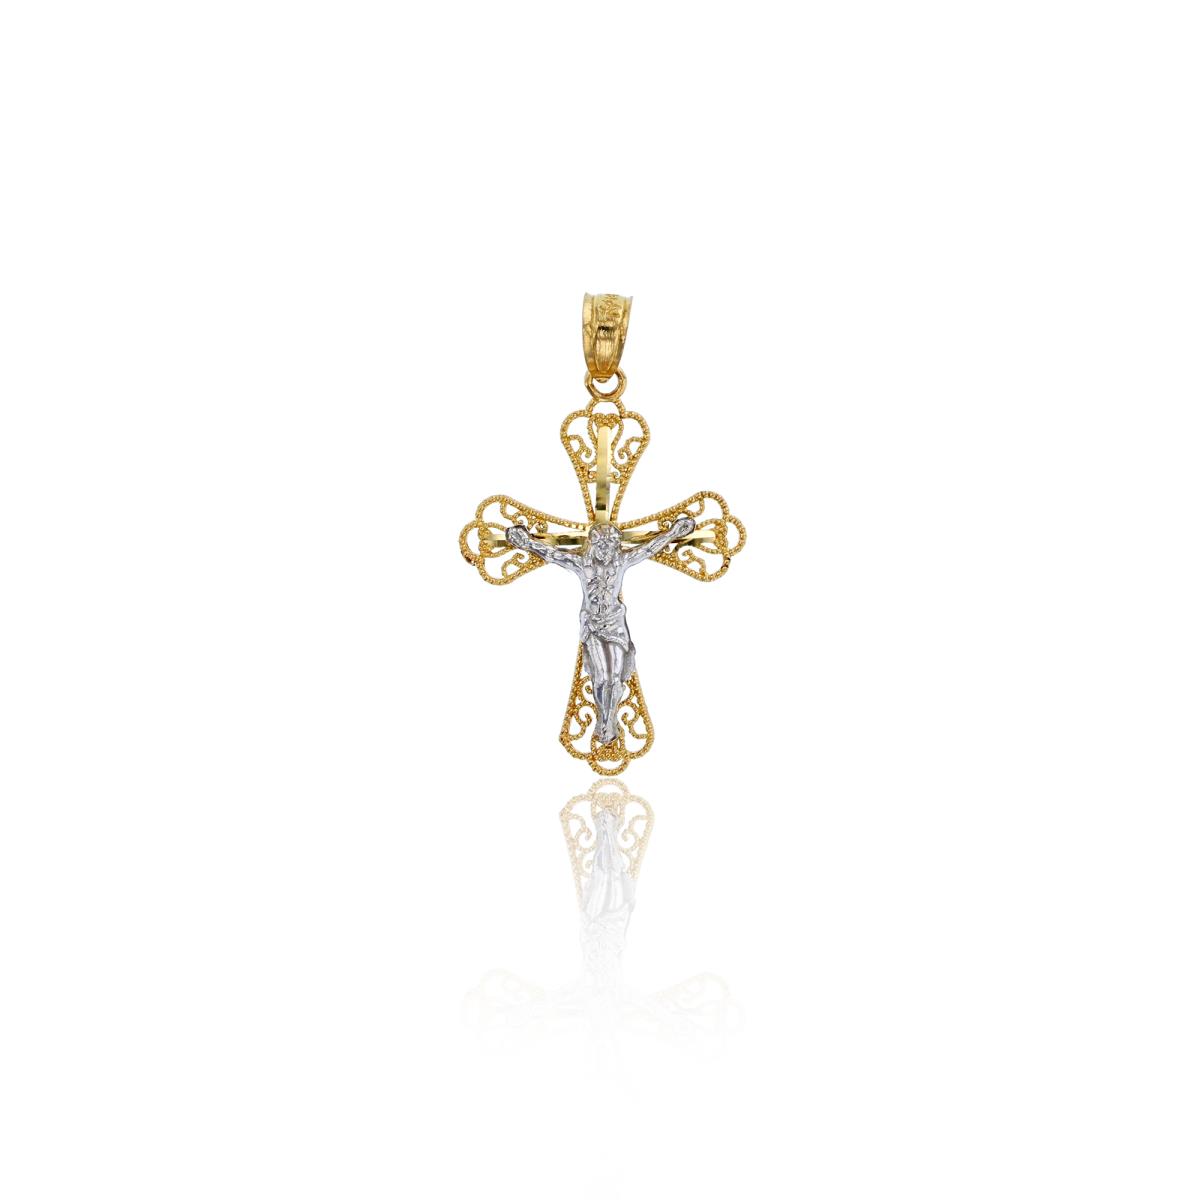 14K Two-Tone Gold 30x17mm Polished & Textured Religious Filigree Crucifix Cross 18" Necklace